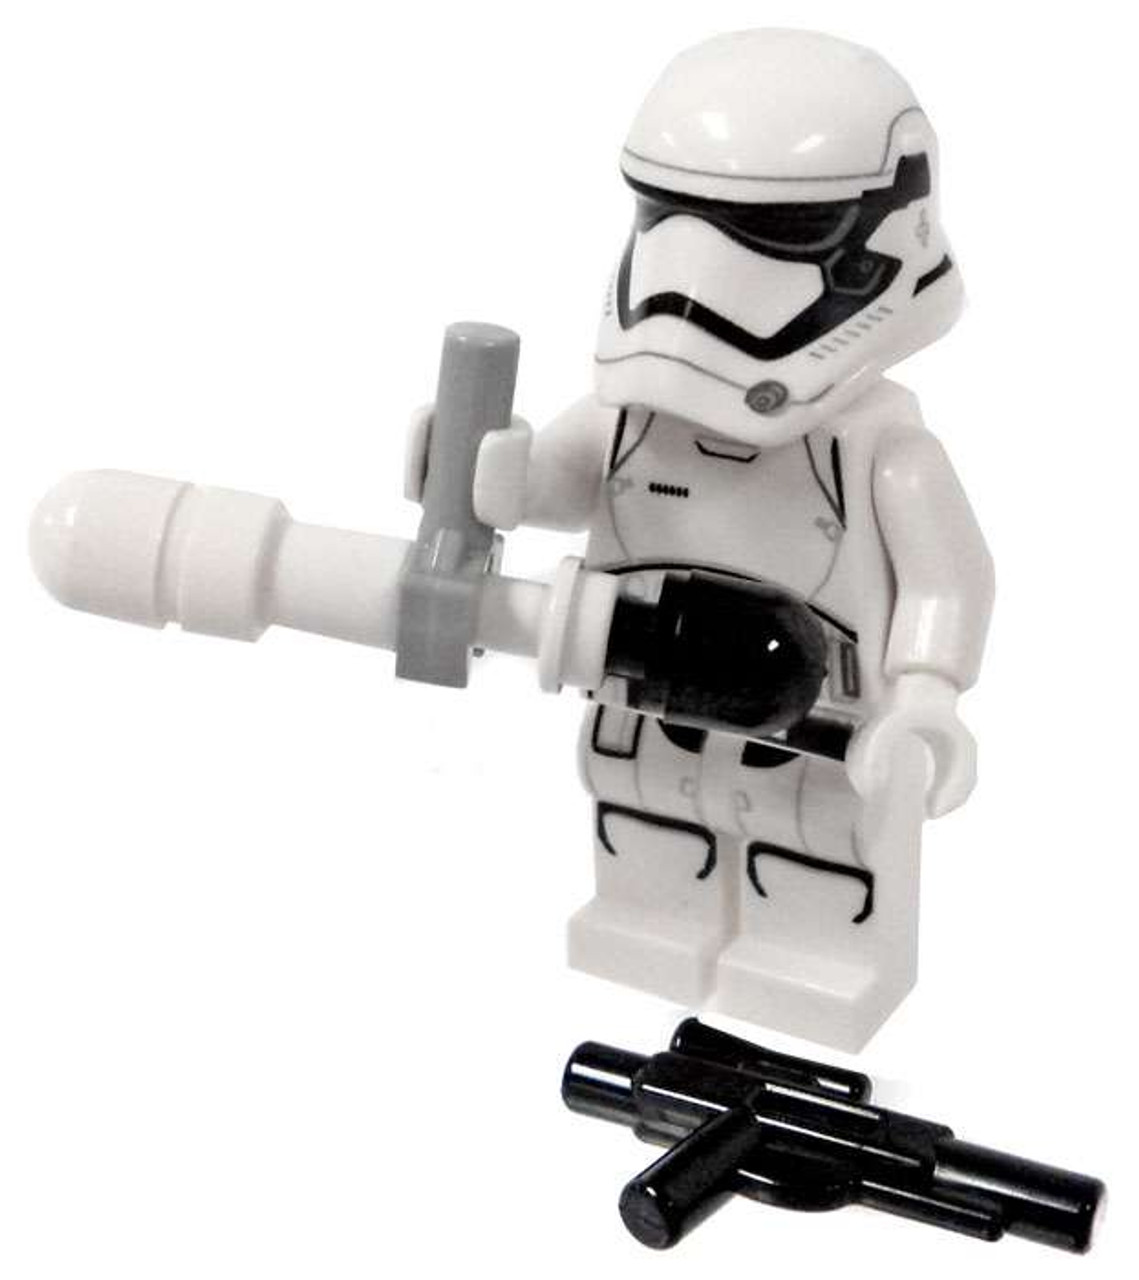 lego imperial stormtrooper